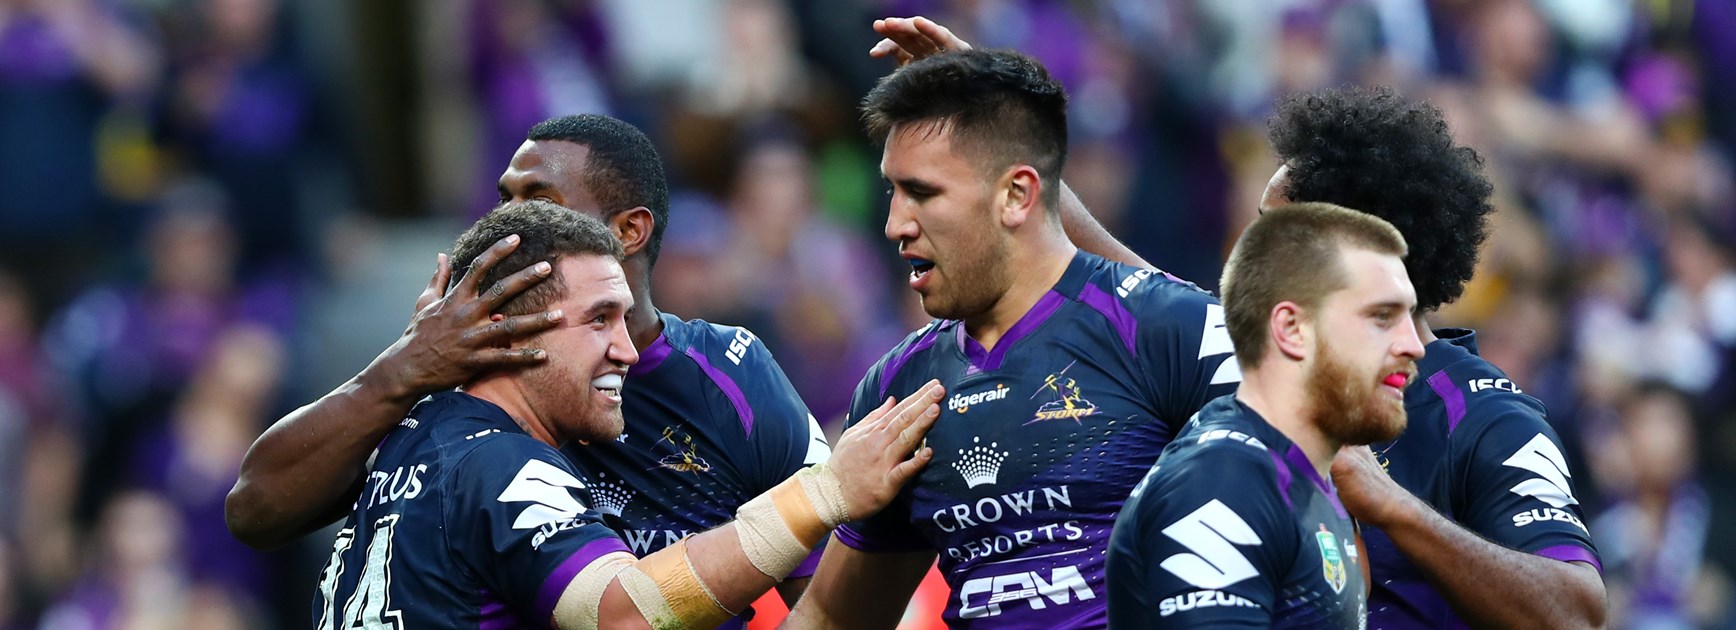 Kenny Bromwich says he and the Storm are trying to treat the grand final like any other game.